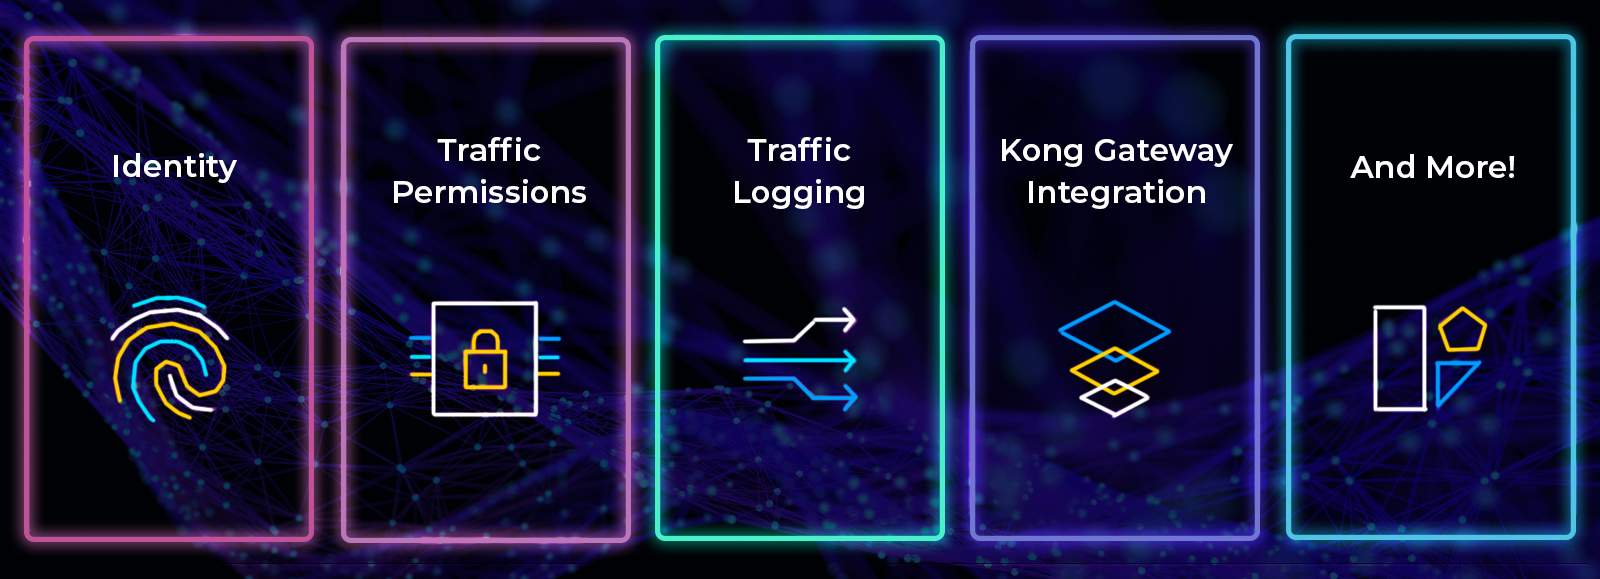 A chart of the various features of Kuma, from identity, traffic permissions, traffic logging, Kong Gateway Integration, and more